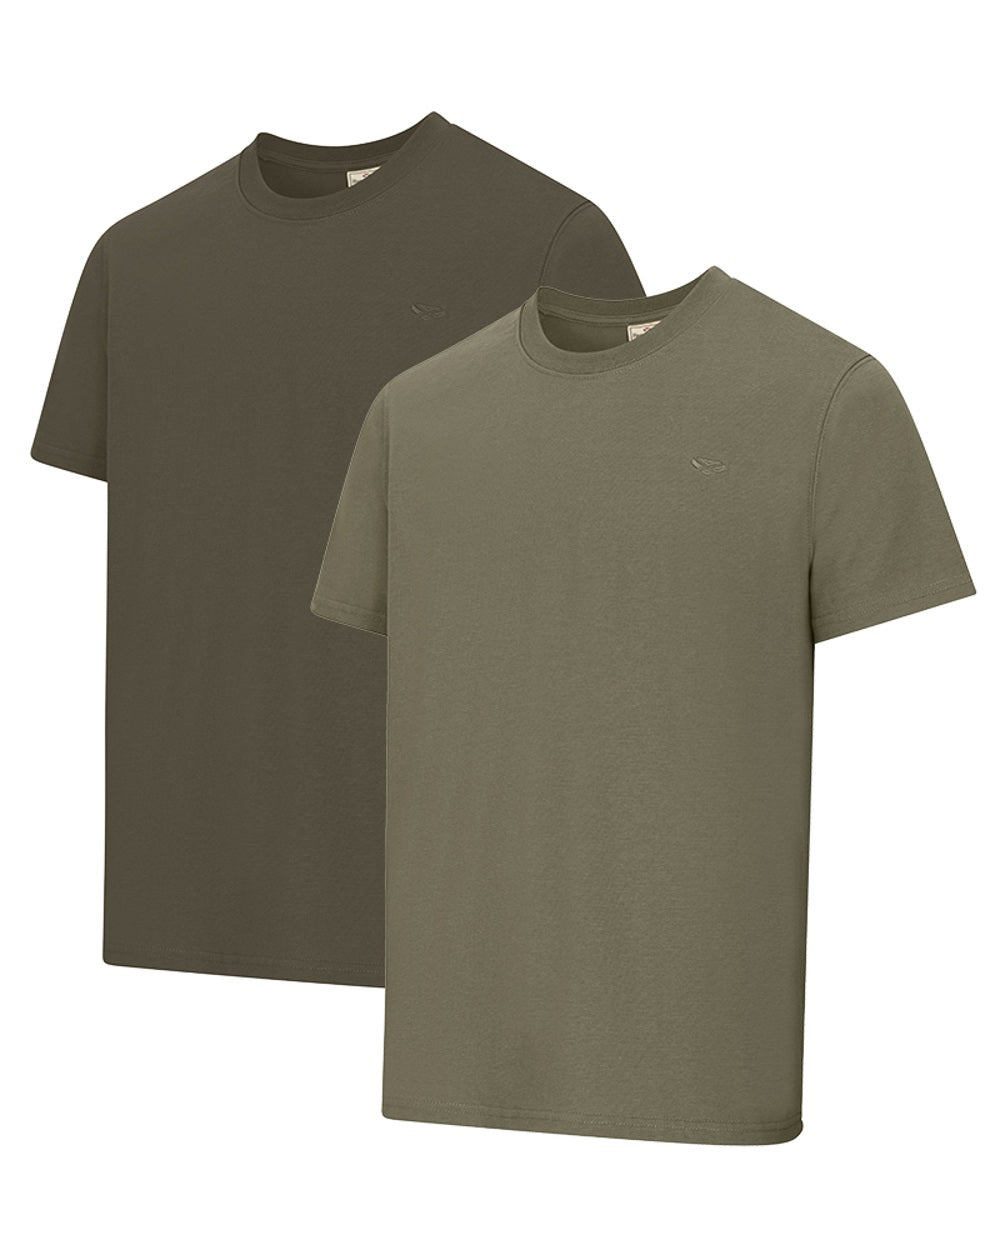 Hoggs of Fife Sandwood 2 Pack Cotton T-Shirts in Forest/Lovat 